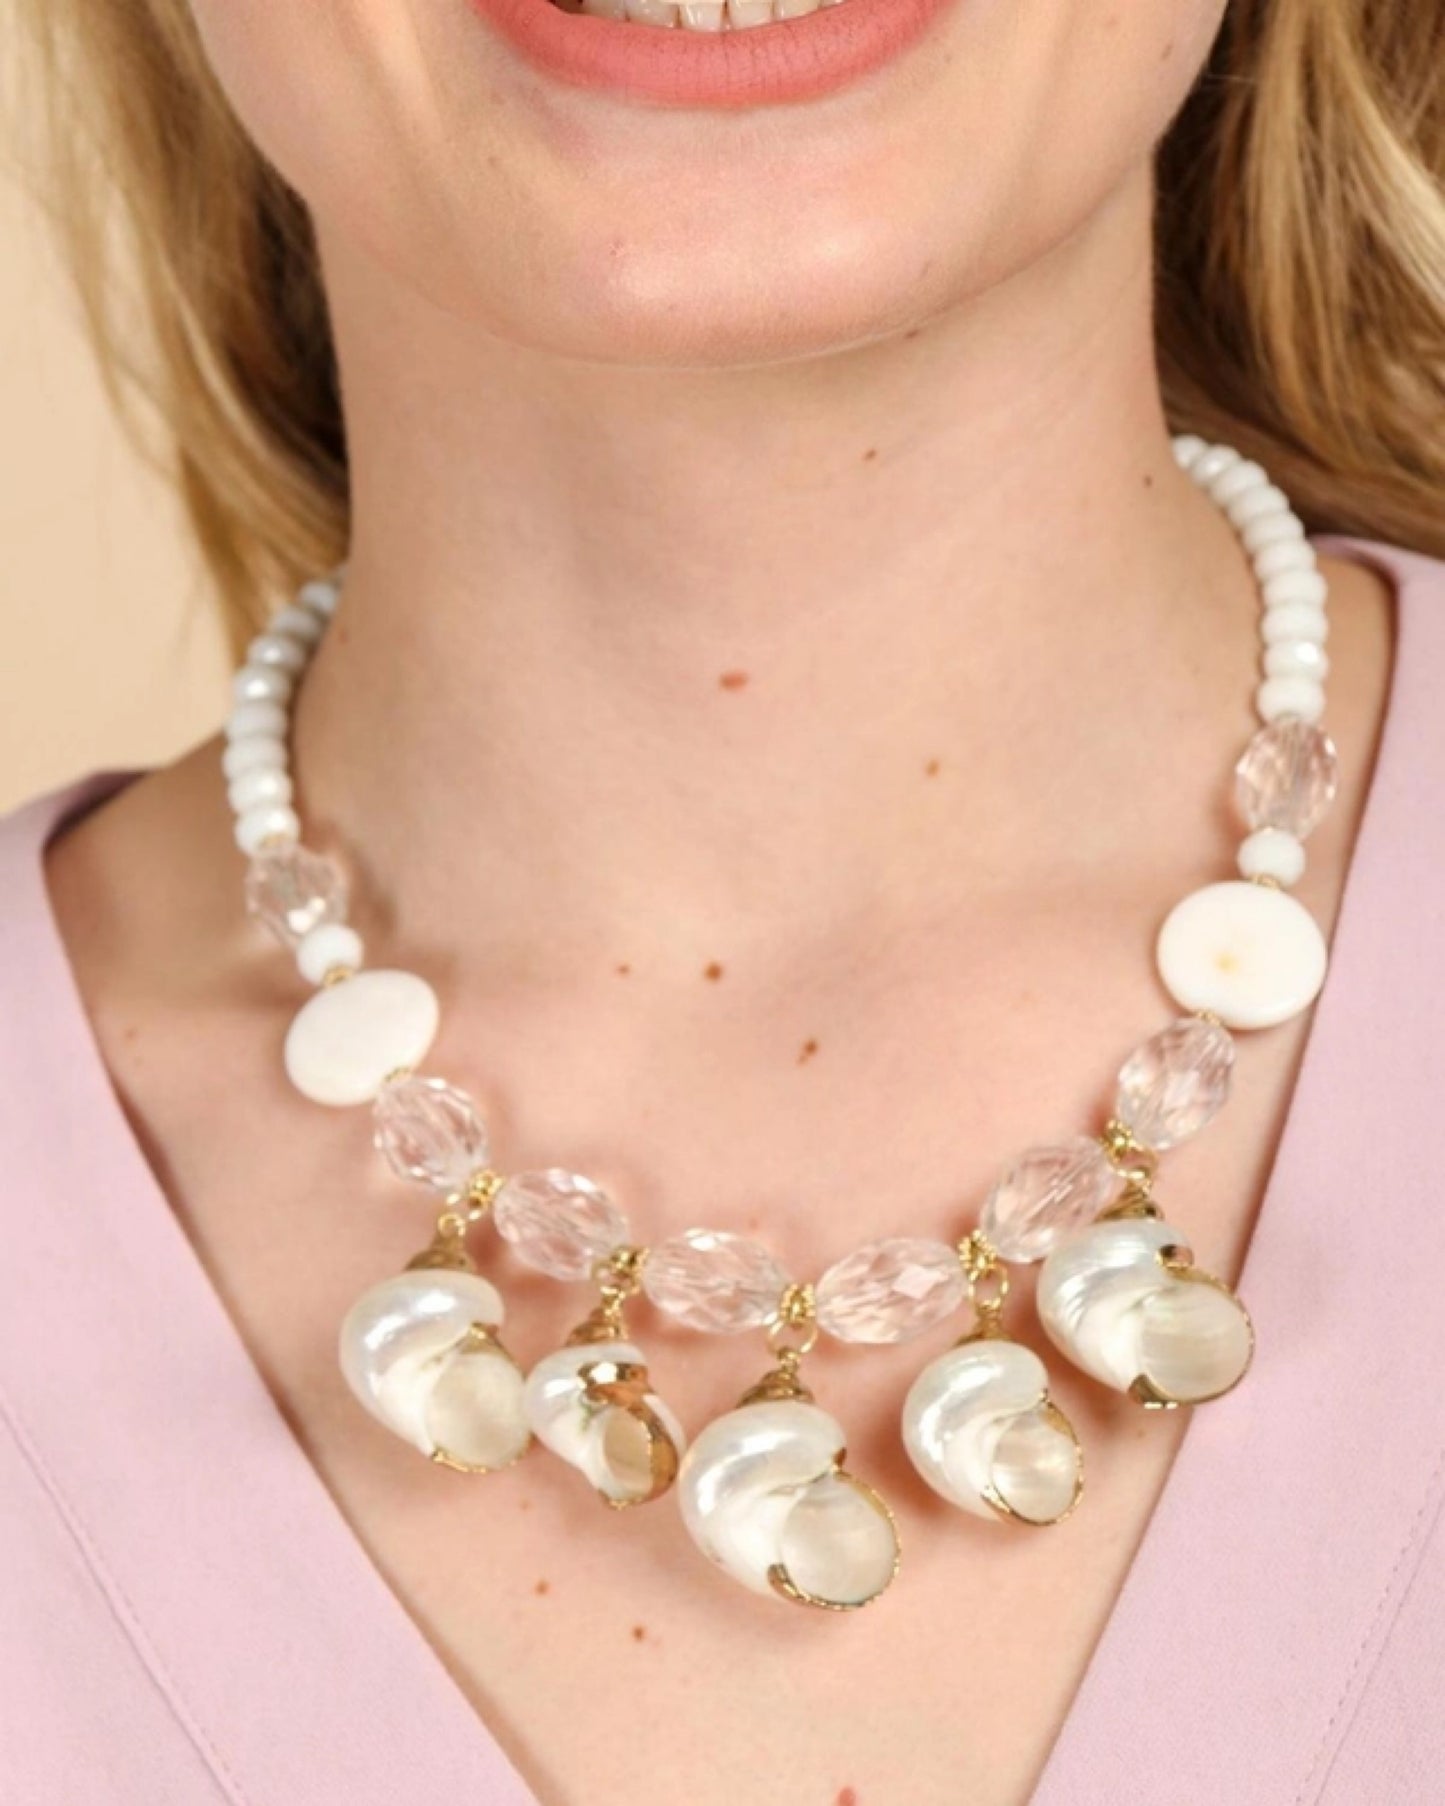 Beige Glass and Shell Beaded Statement Necklace